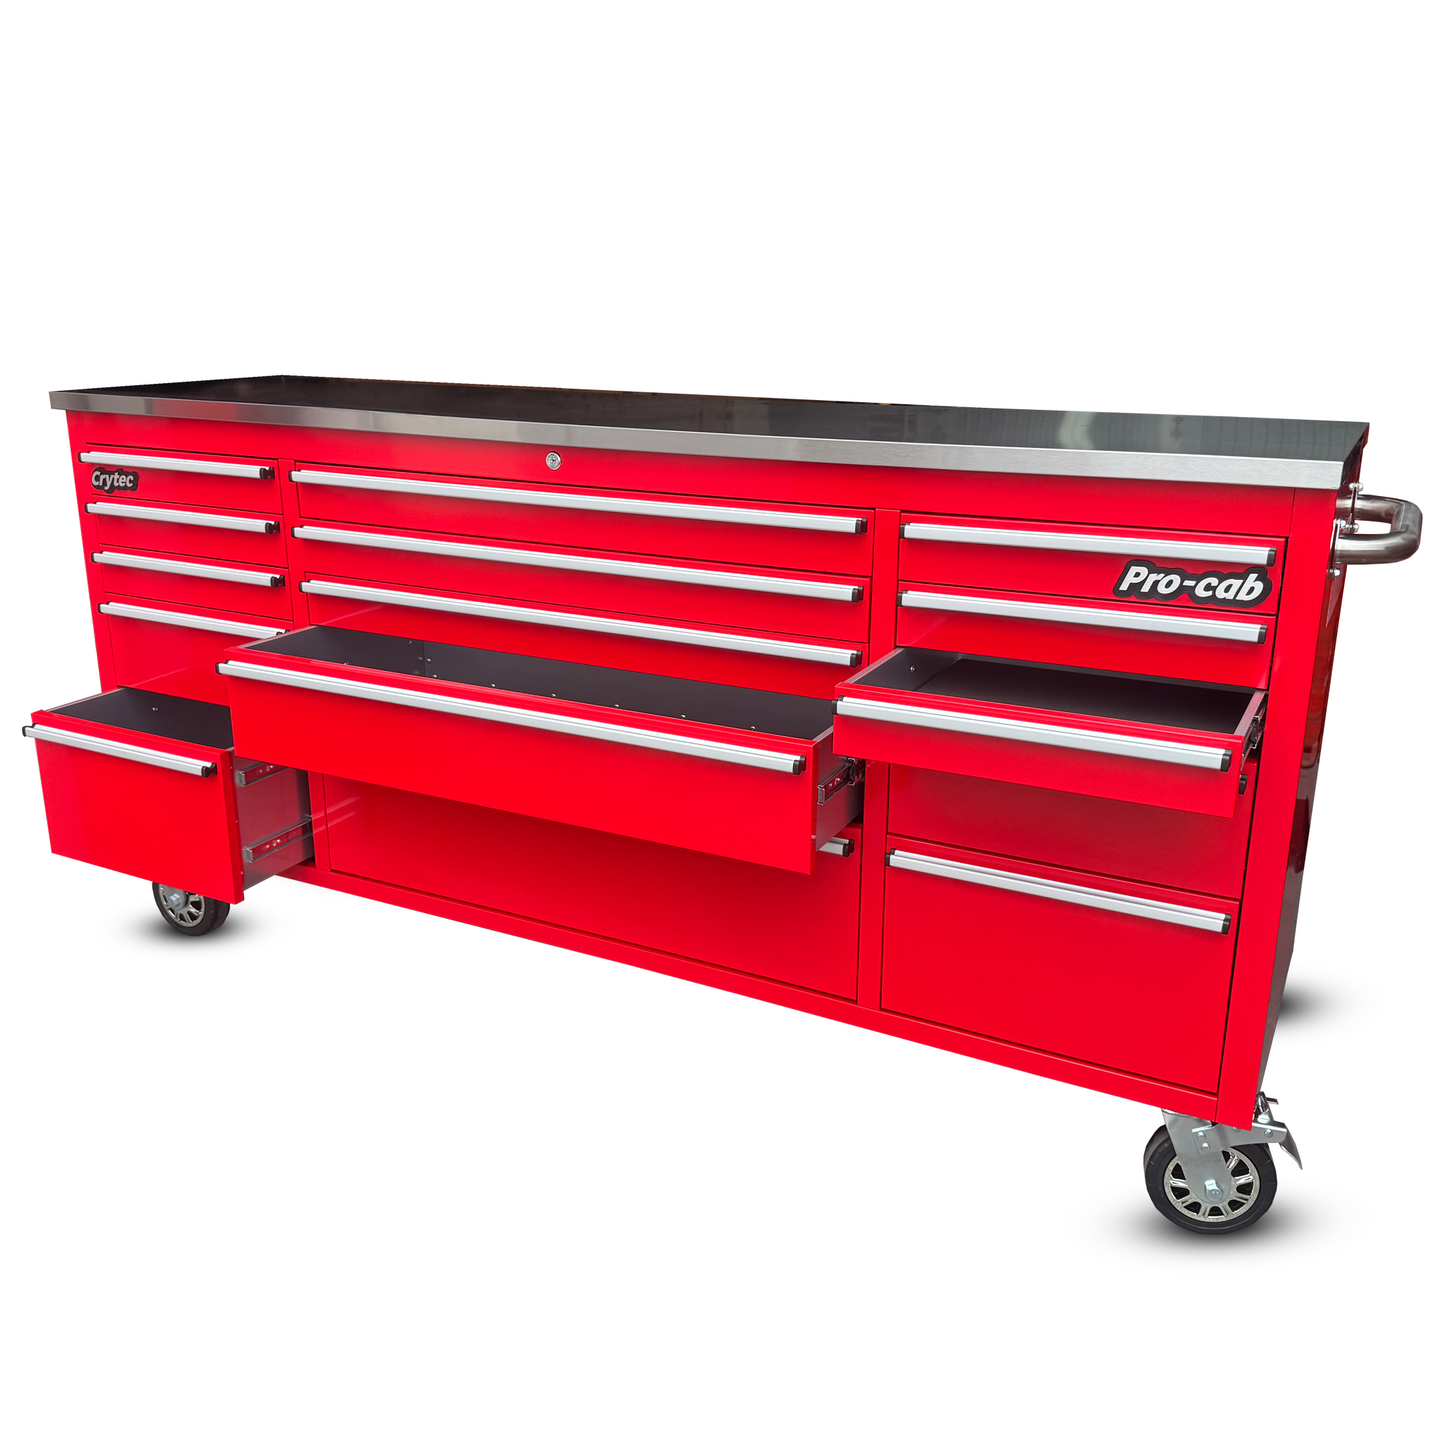 Crytec Pro Cab Red 72 inch Stainless Steel Top Tool Cabinet Snap On Style Box